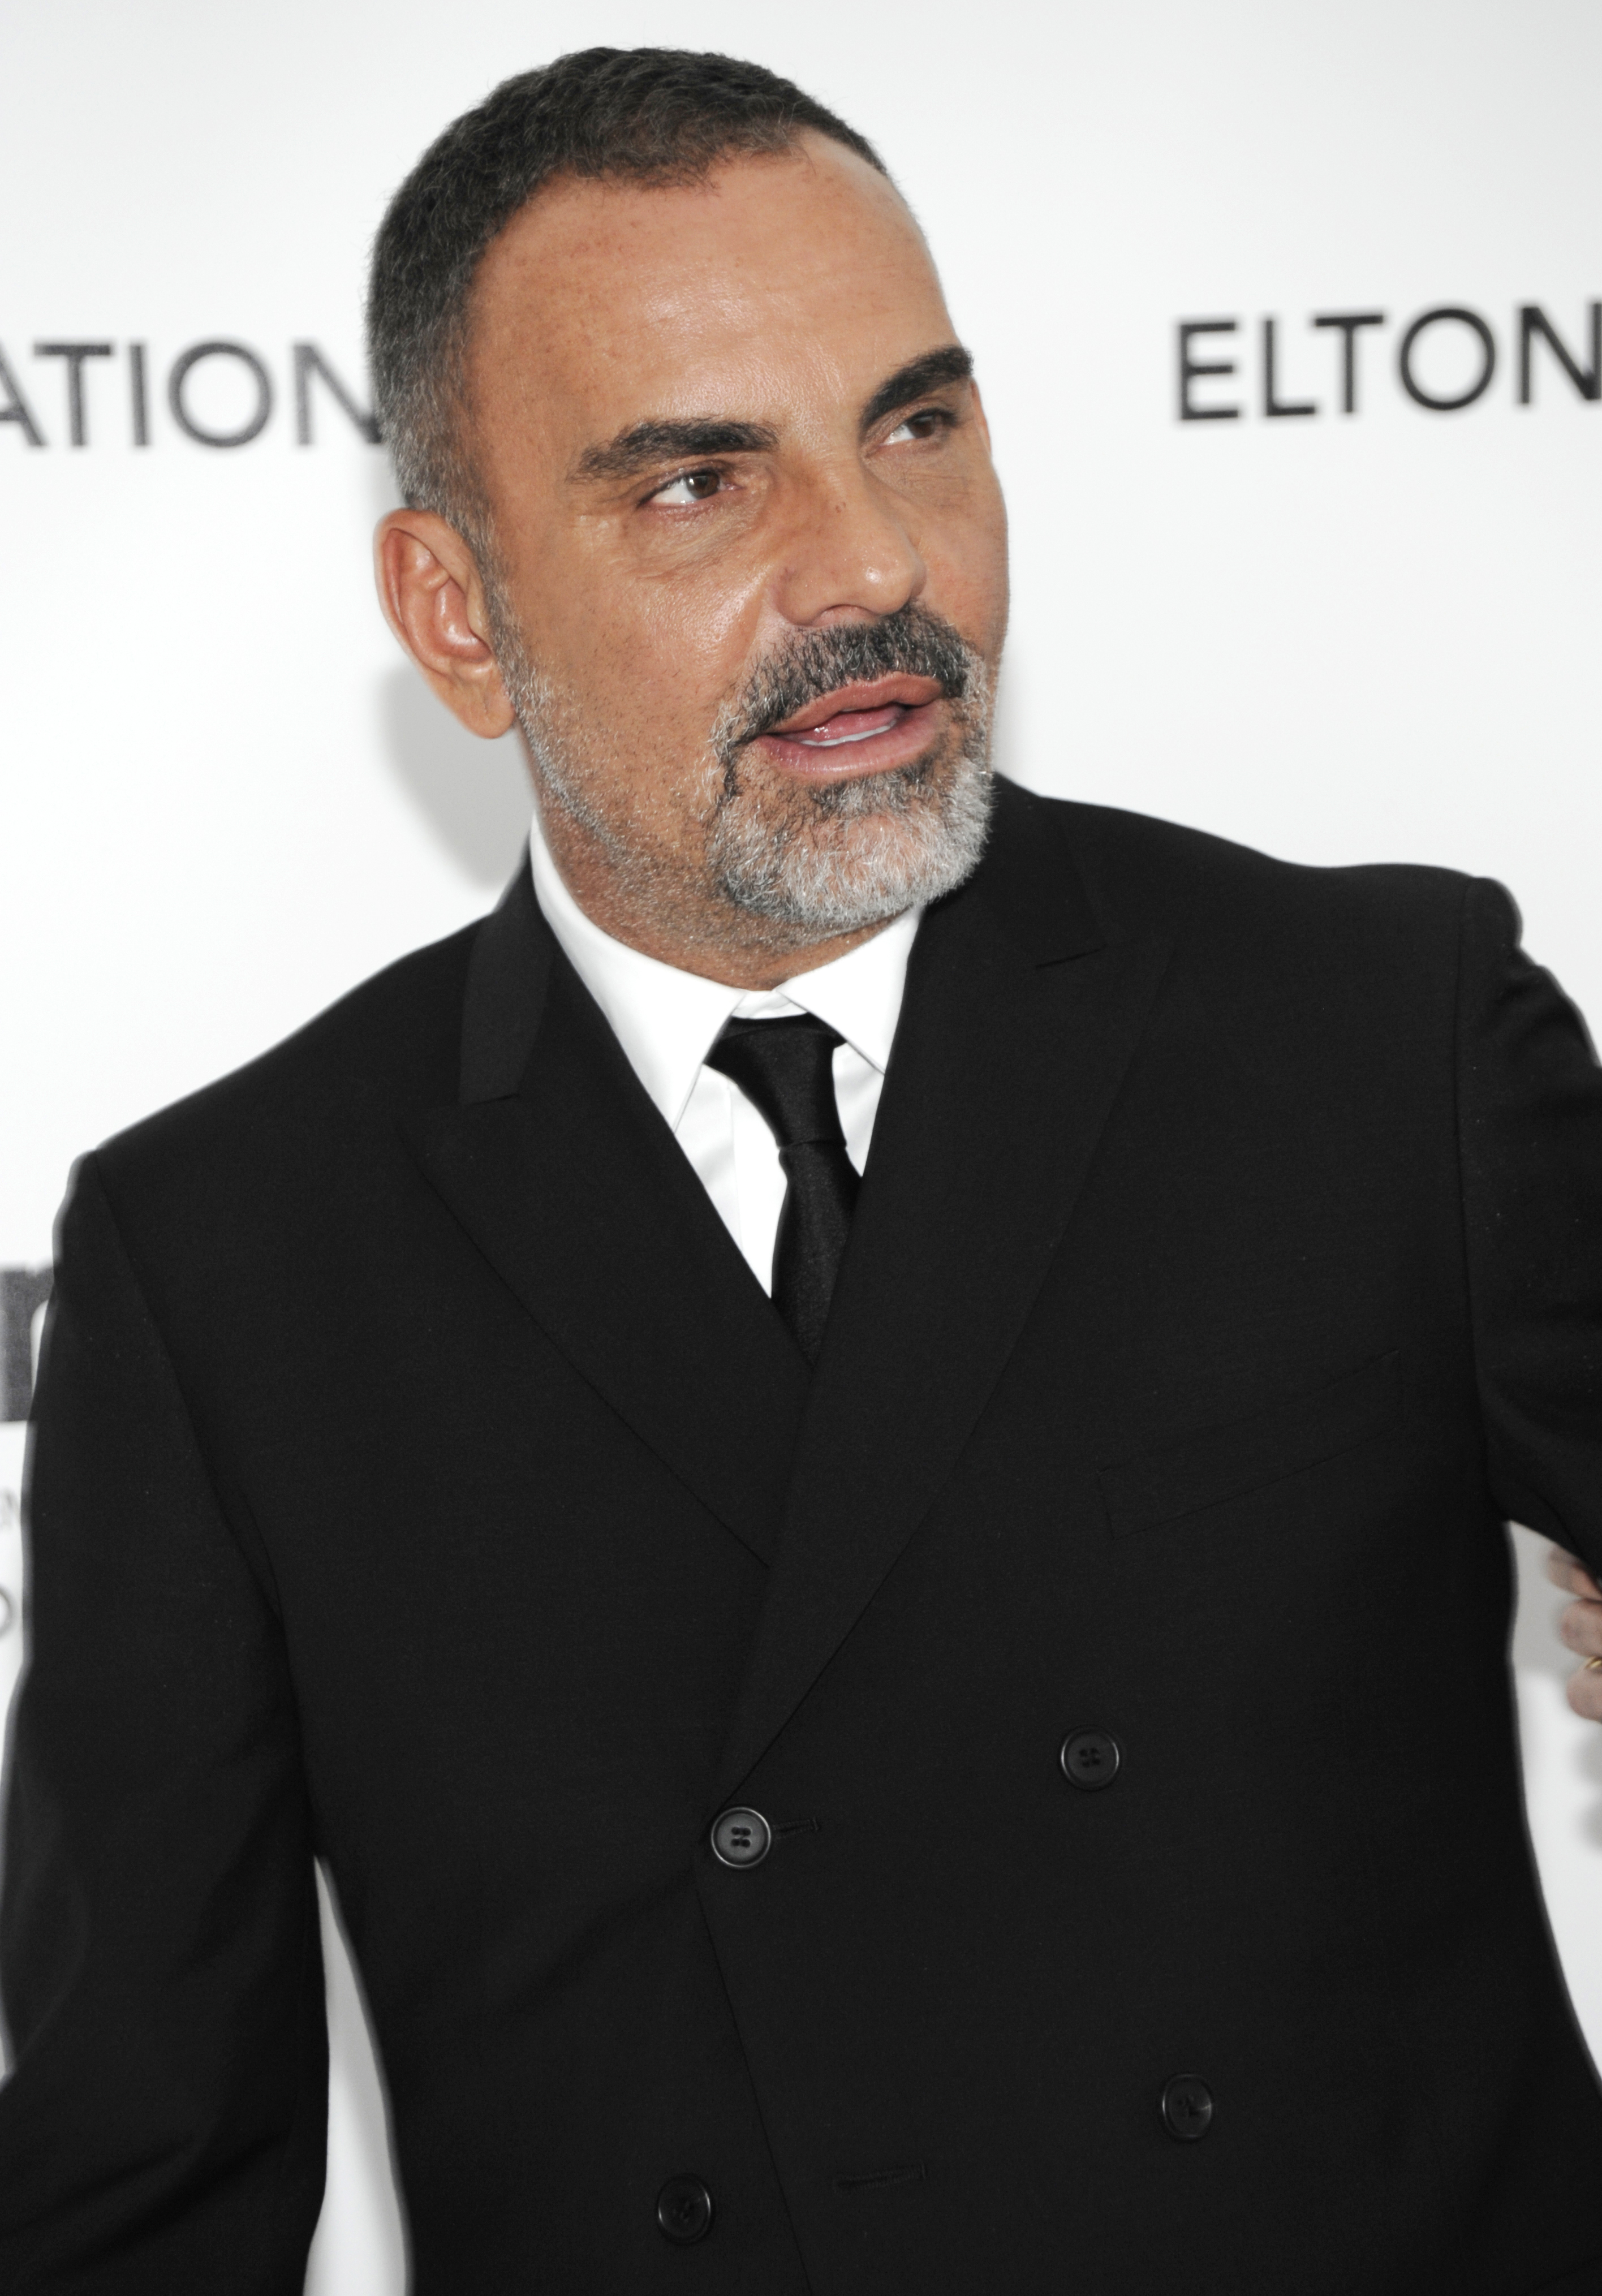 Christian Audigier at the Elton John AIDS Foundation Academy Awards viewing party in West Hollywood, Calif. on Feb. 26, 2012.